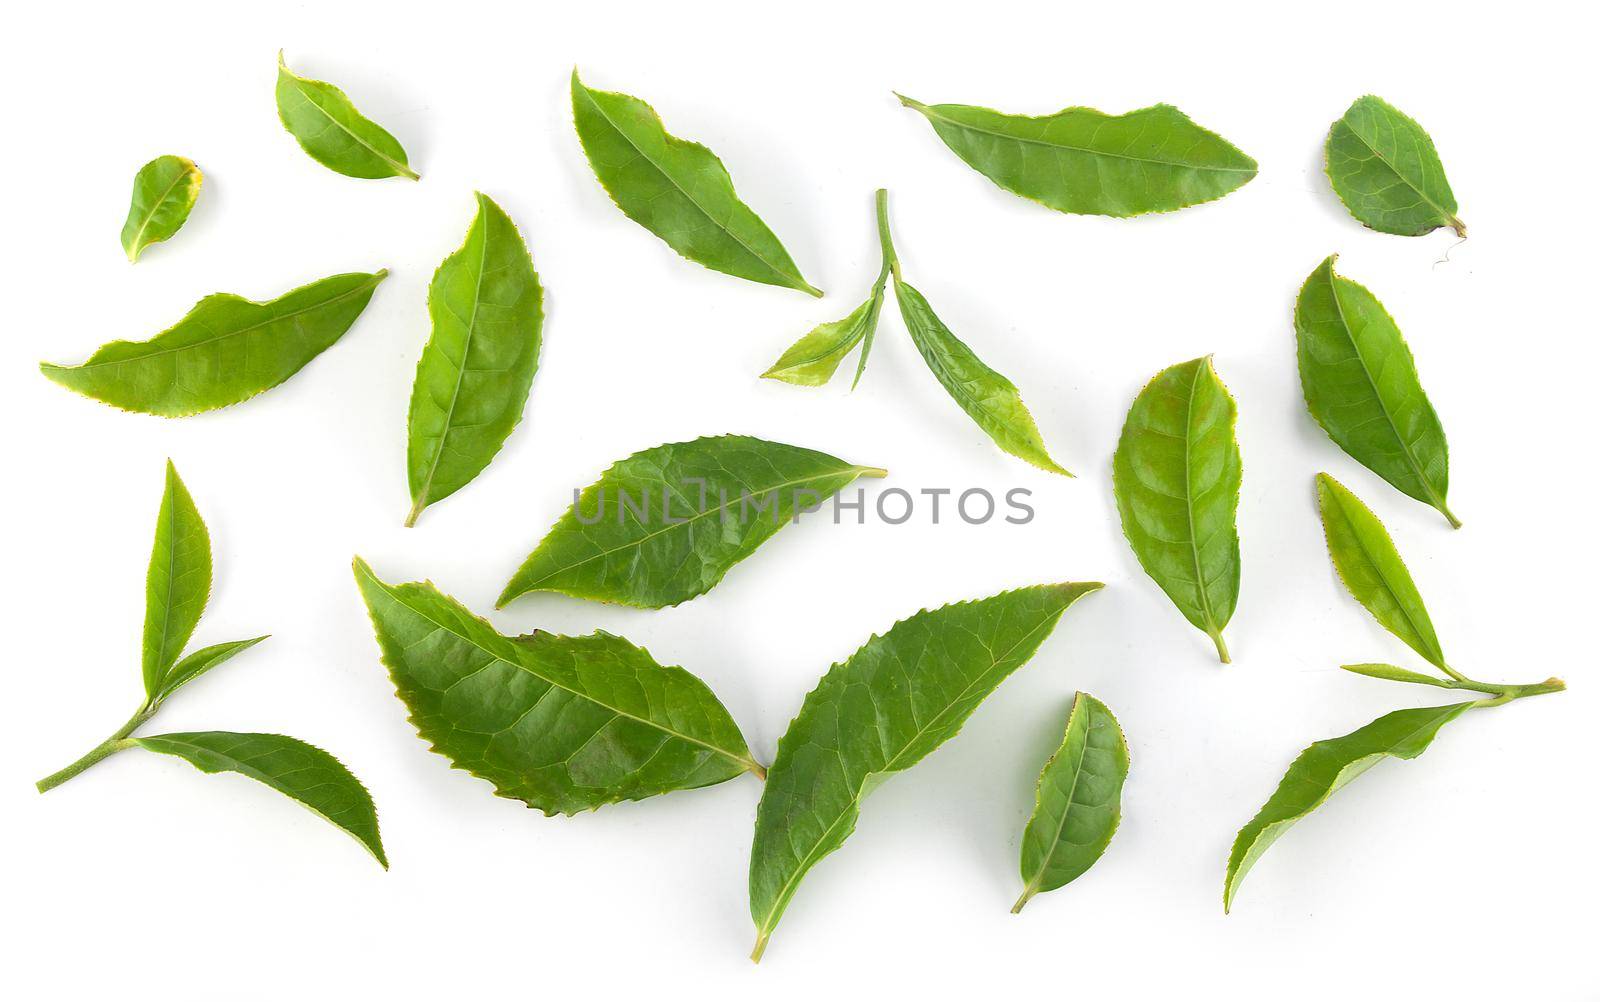 Pattern with green tea leaves on the white background